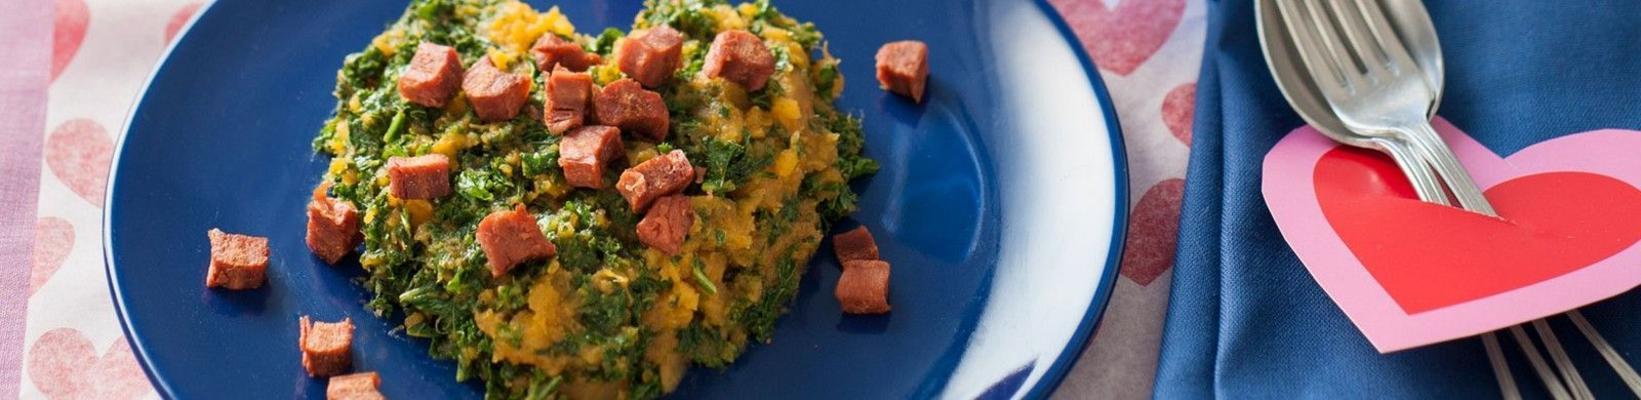 kale with sweet potato and vegetarian bacon